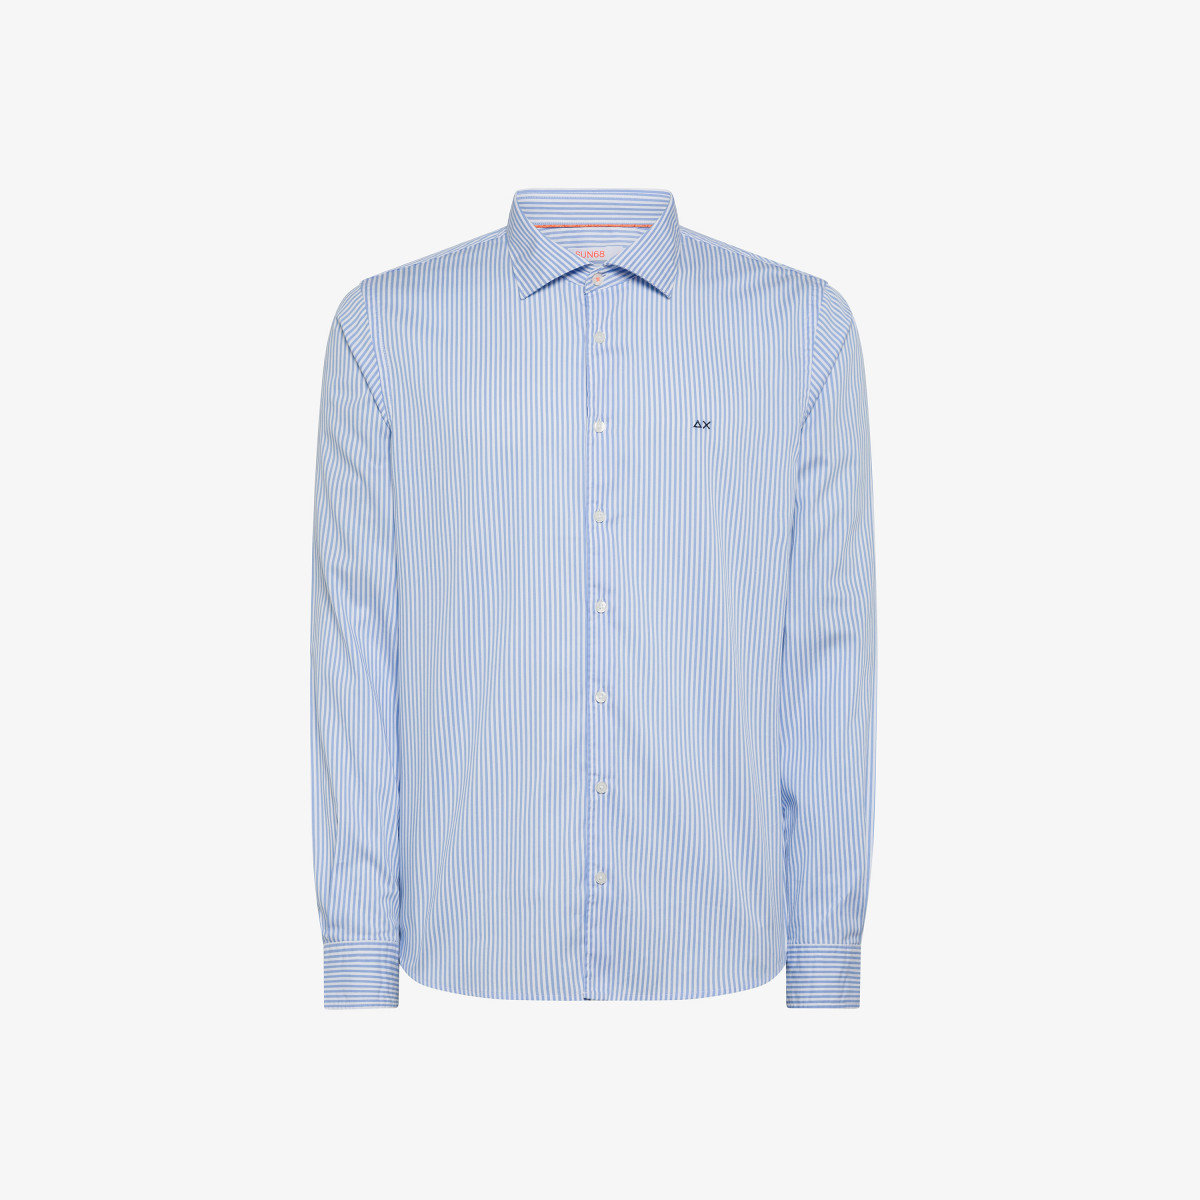 SHIRT CLASSIC STRIPE WITH FLUO DETAIL L/S WHITE/LIGHT BLUE